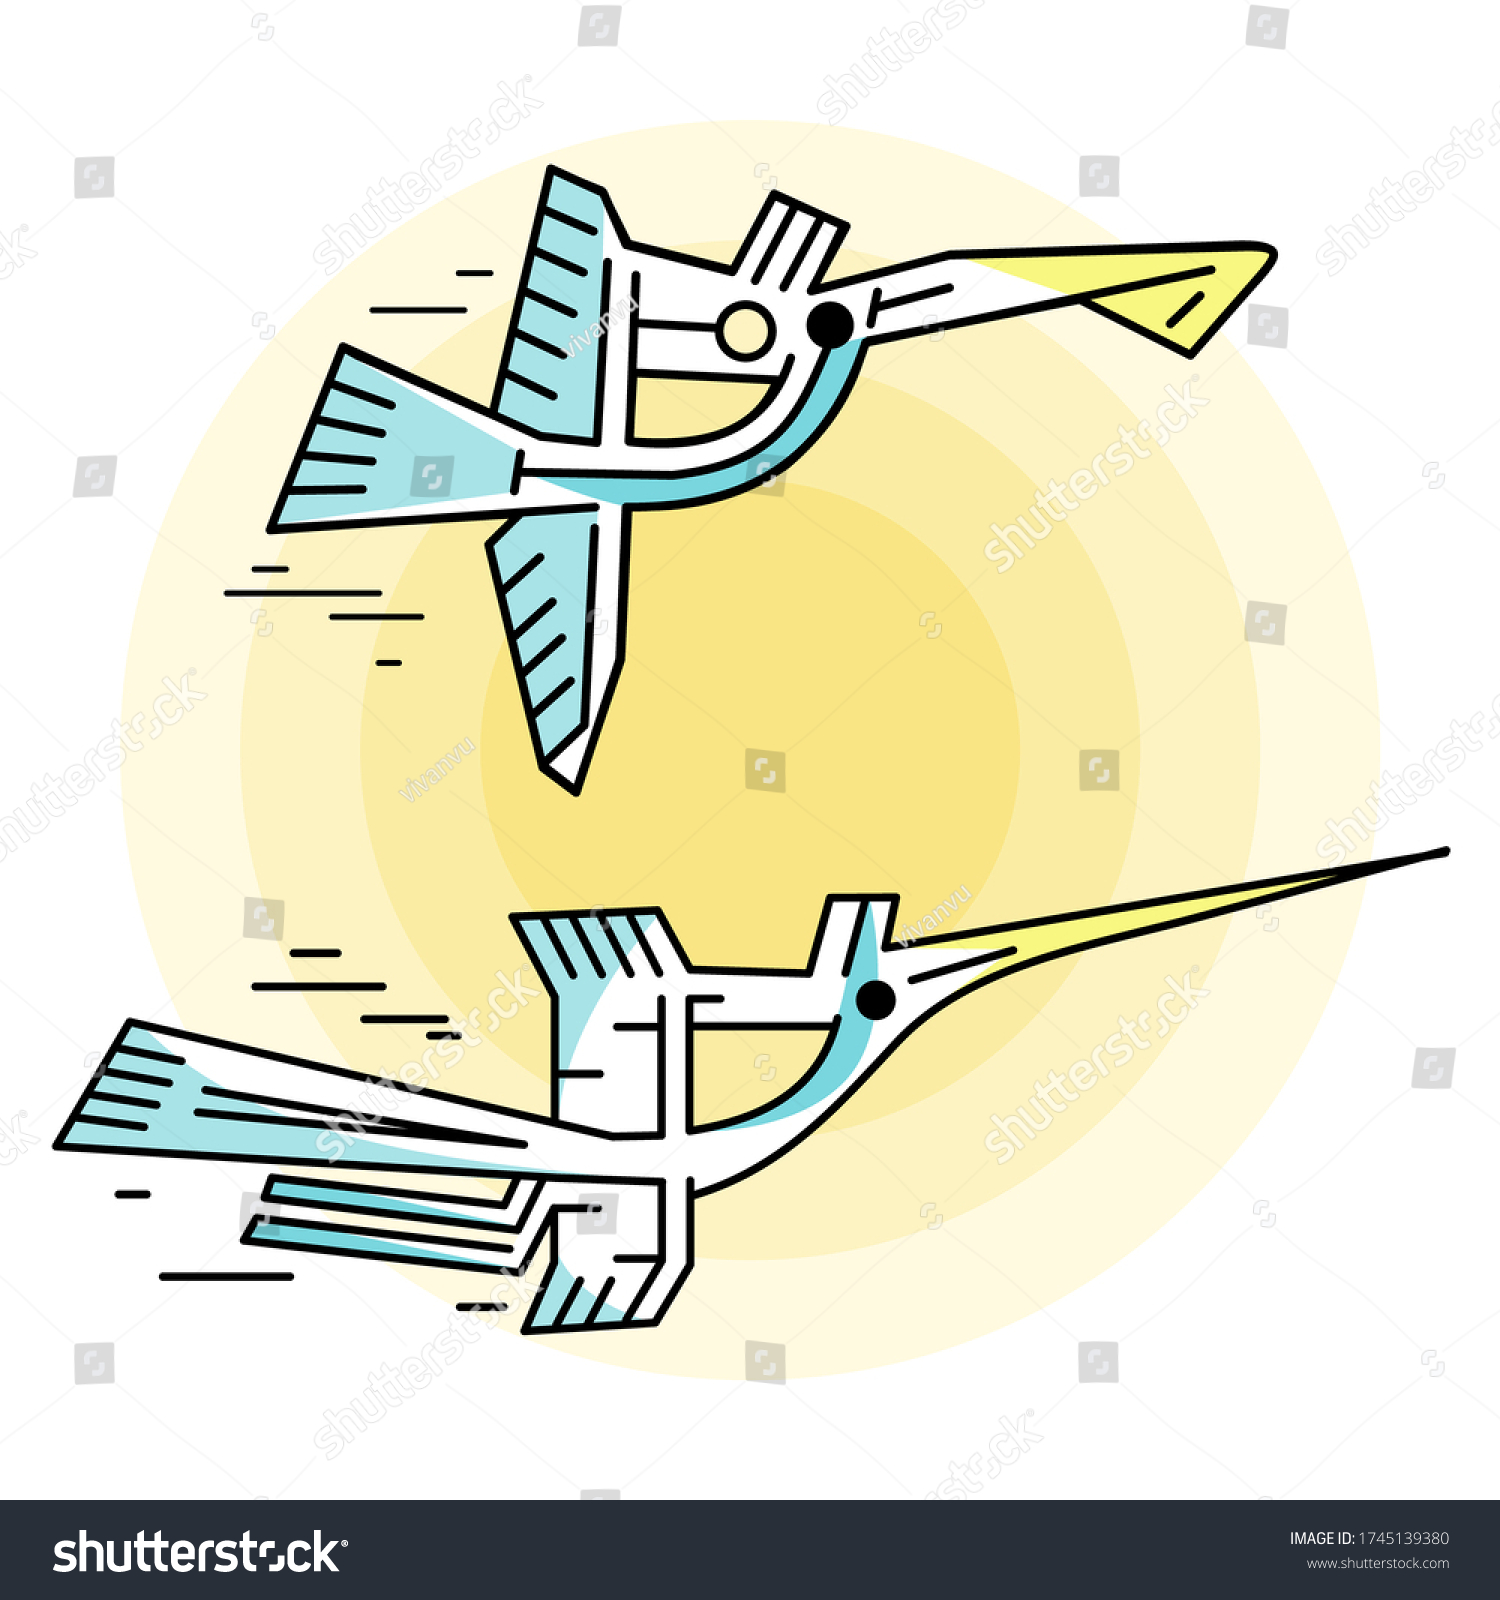 SVG of Vector of Vietnamese traditional bird icons in outline style. svg